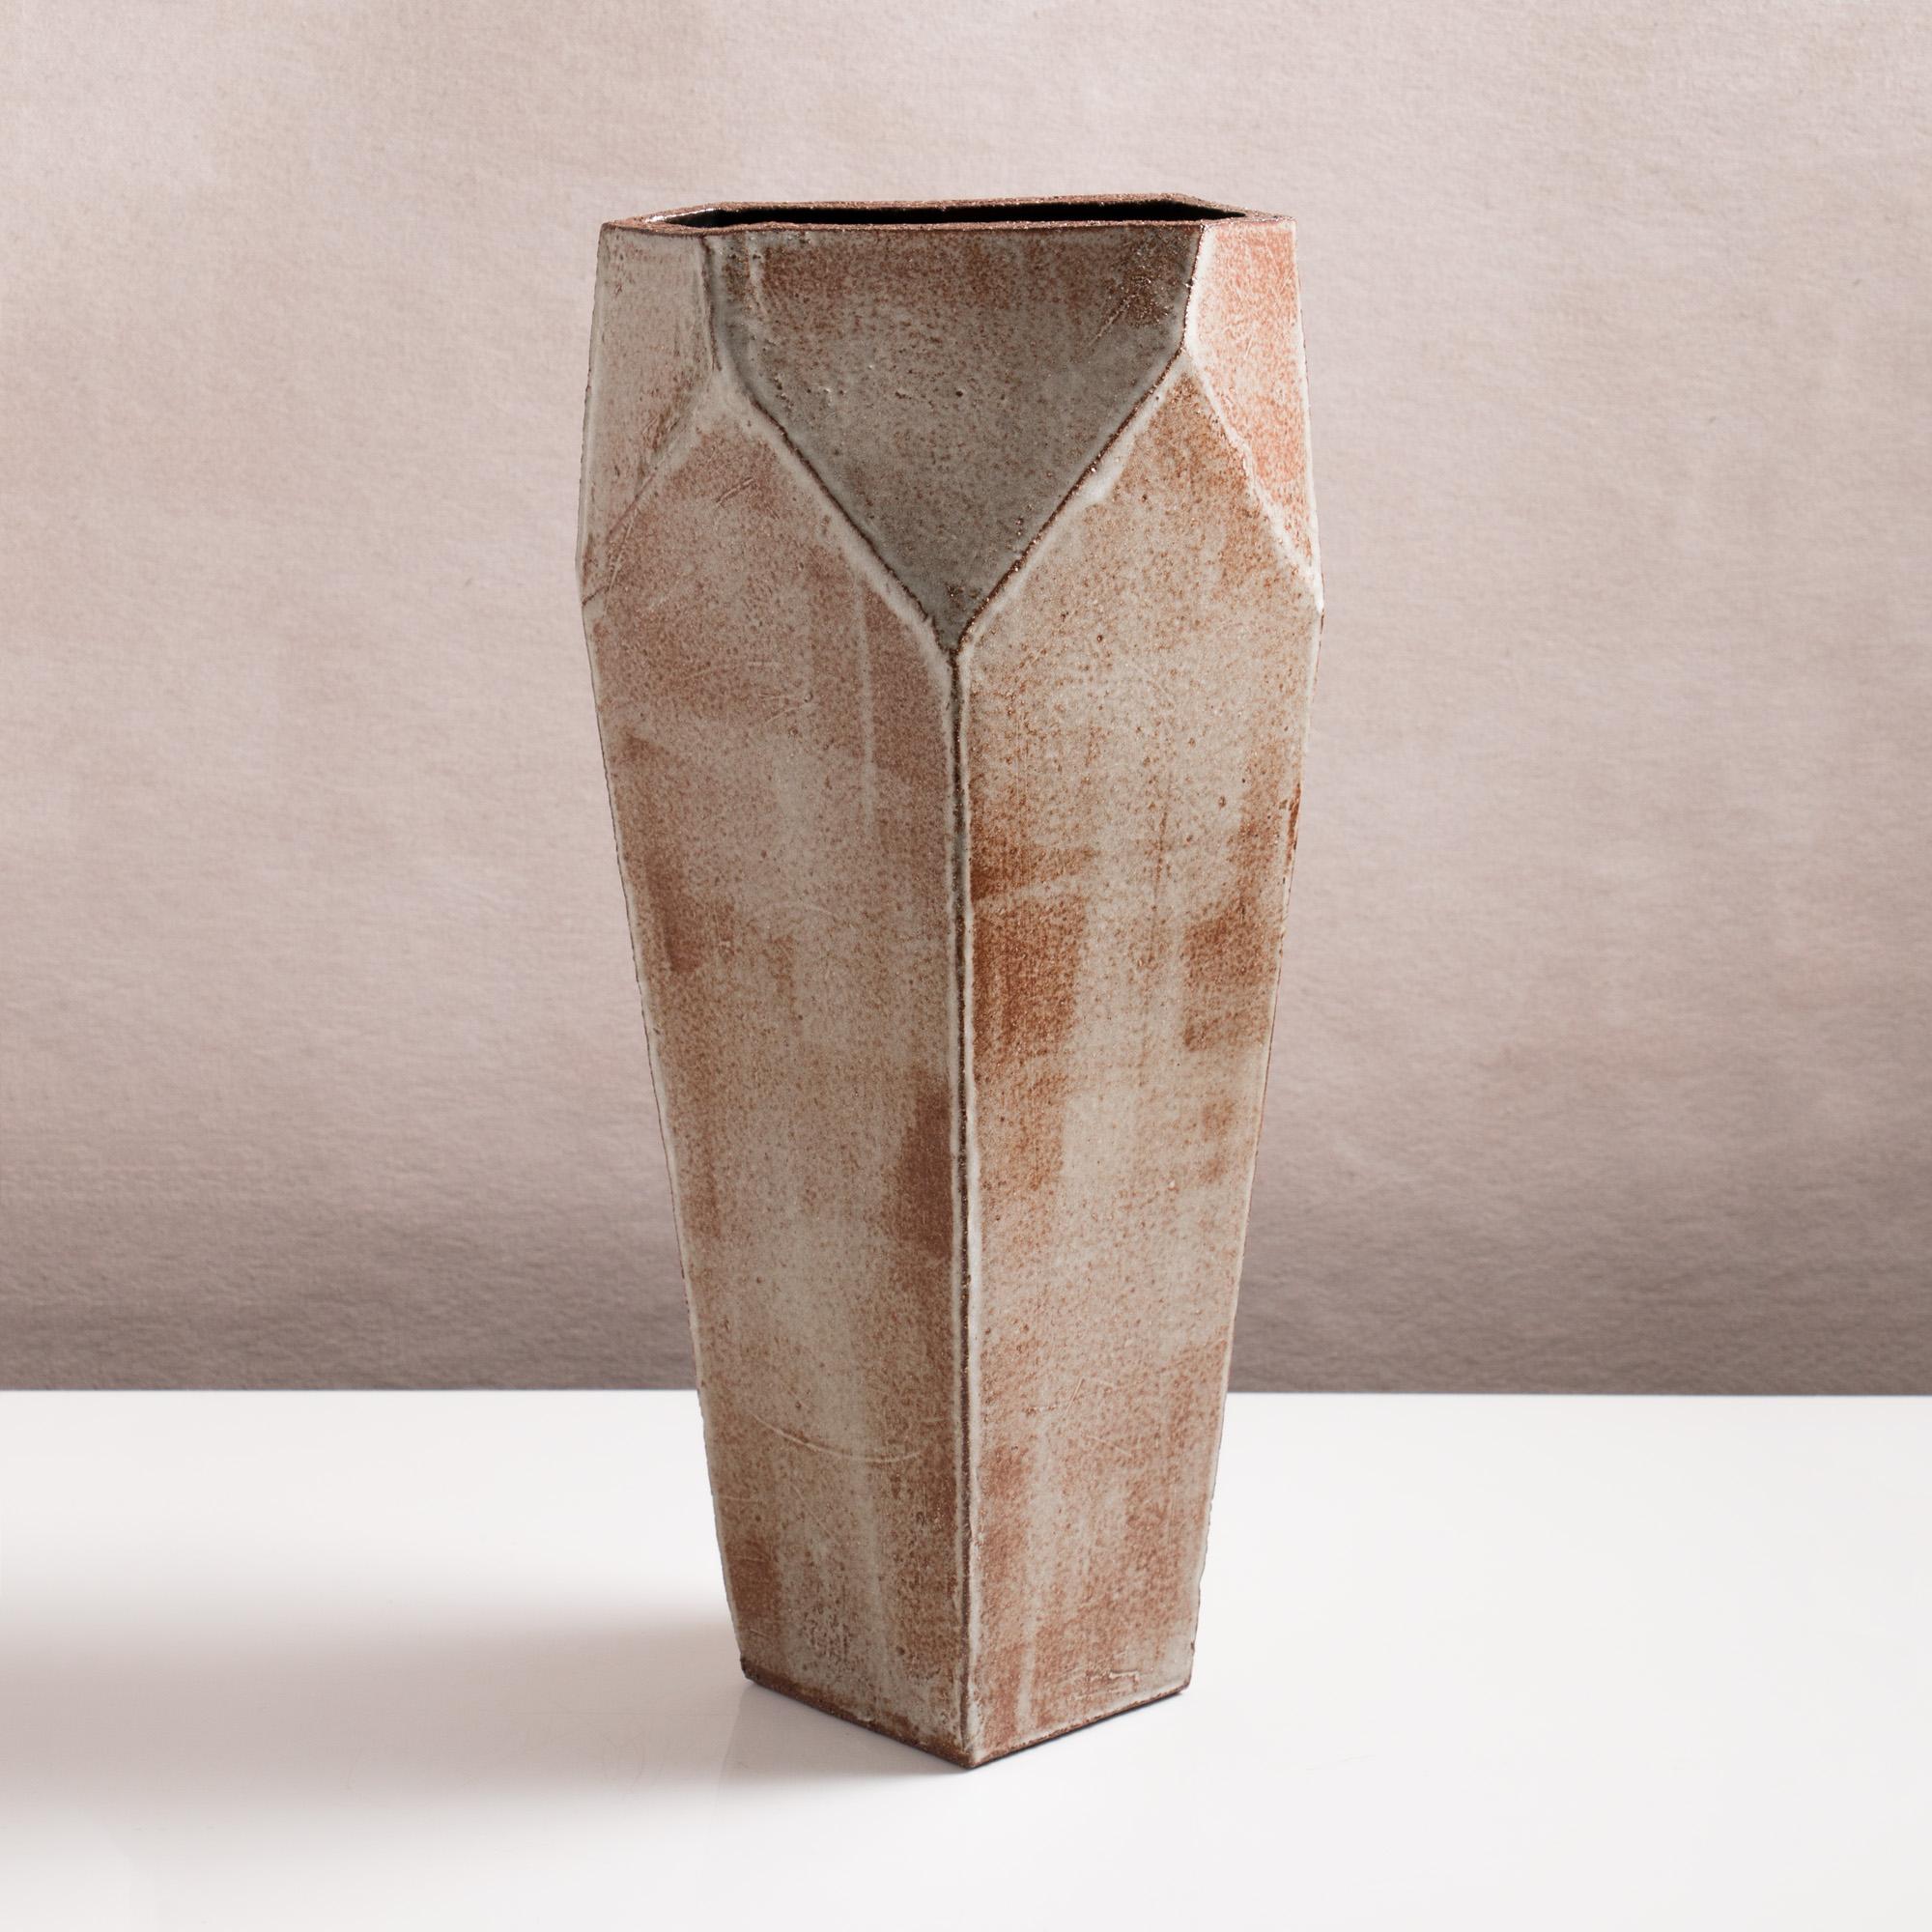 Inspired by midcentury Brutalist architecture, this tall ceramic vase combines clean geometric lines with the warmth and individuality inherent in handmade work. The shape is simple and elegant, with geometric facet detailing at the opening. Each